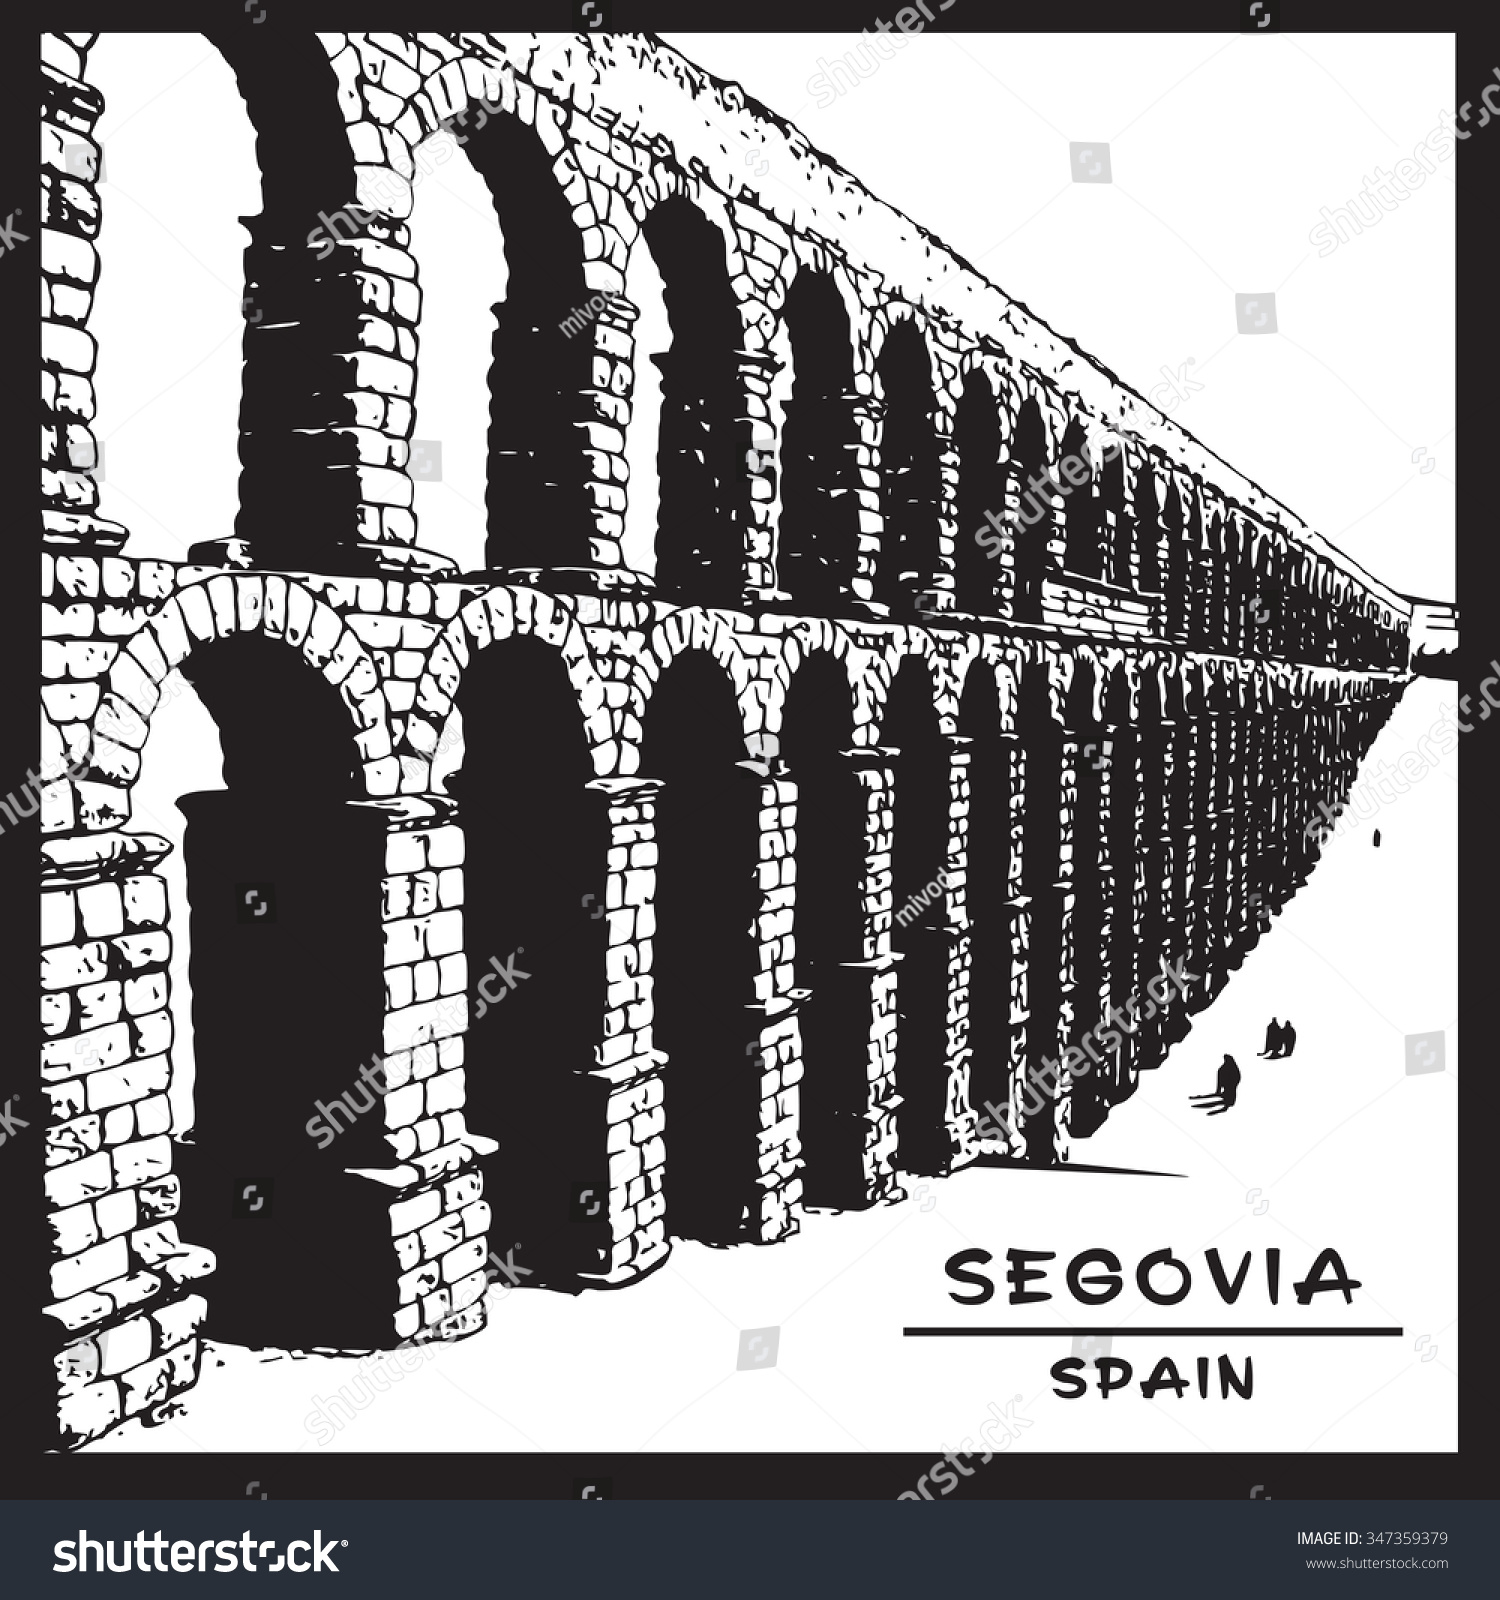 SVG of Roman aqueduct of Segovia. National symbol of Spain. Black and white image.
Vector illustration in engraving style. svg